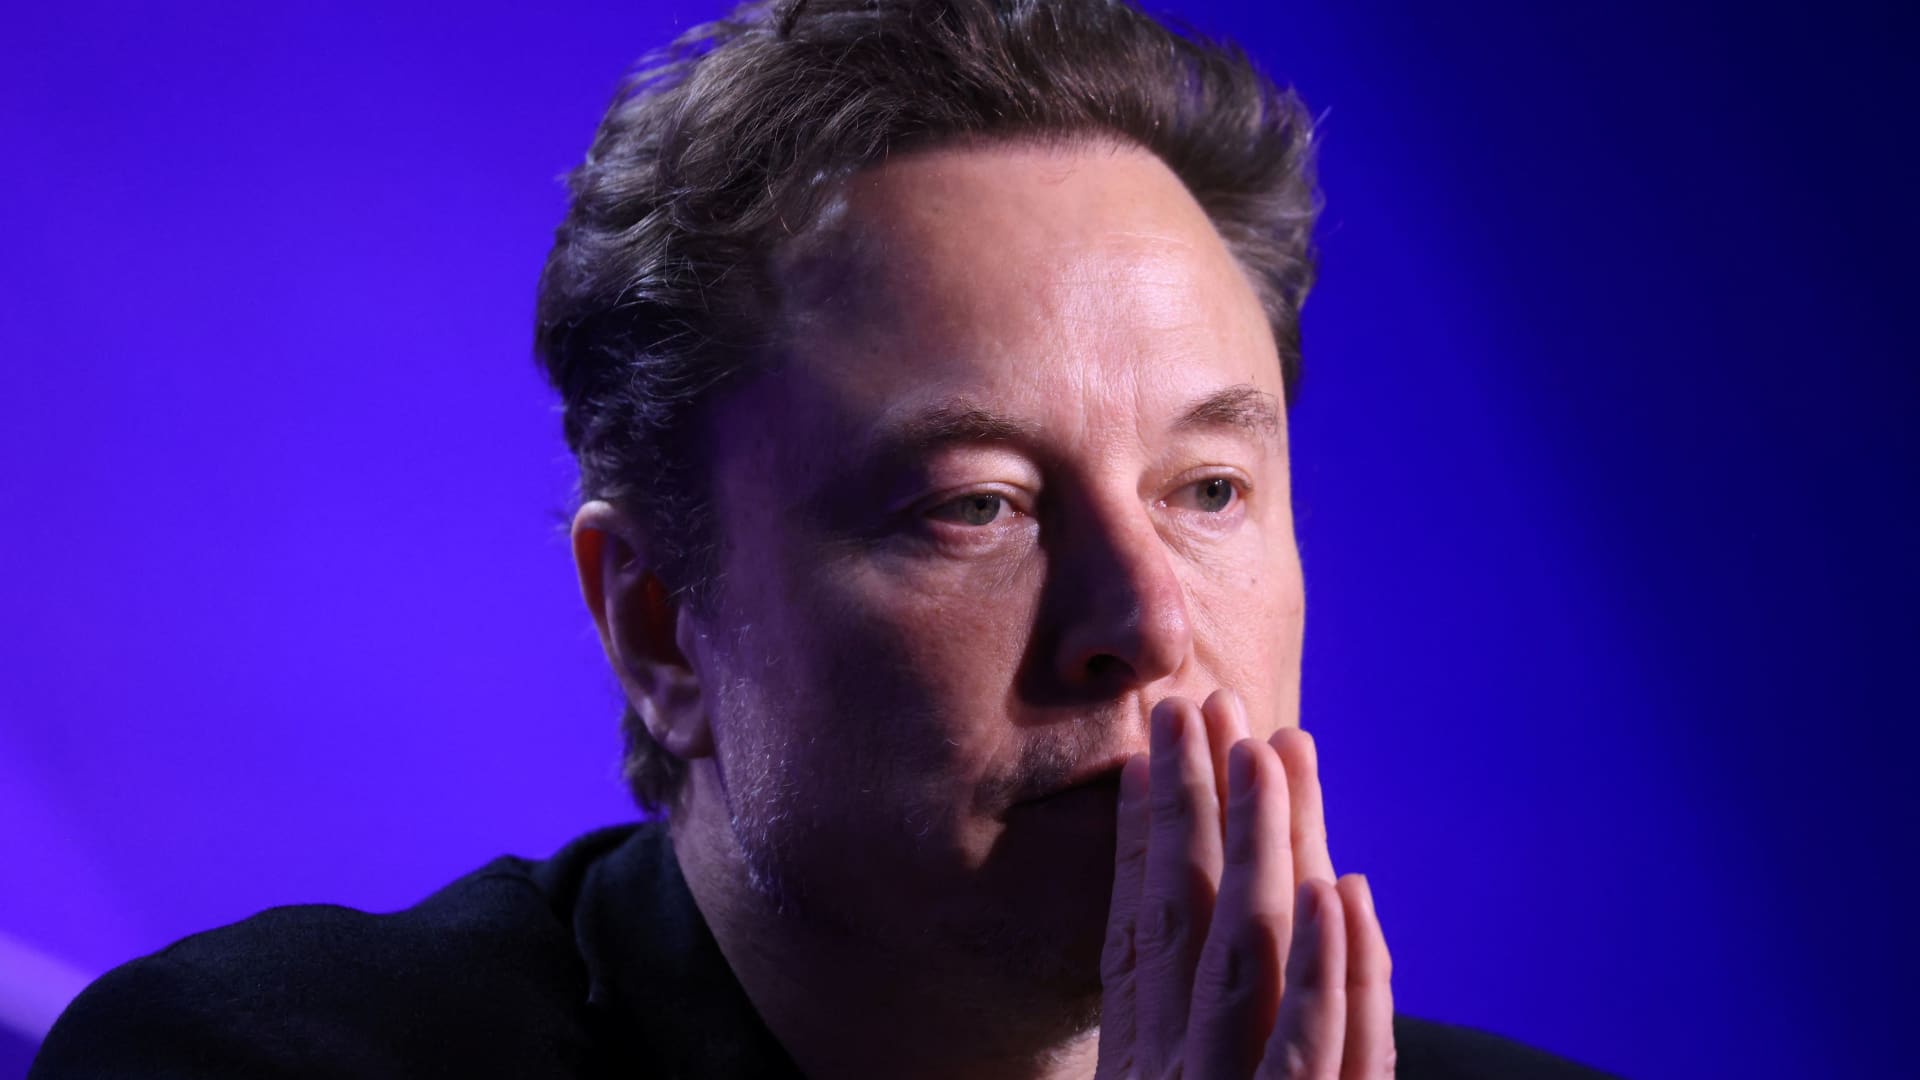 Elon Musk to ban Apple devices from his companies over OpenAI deal